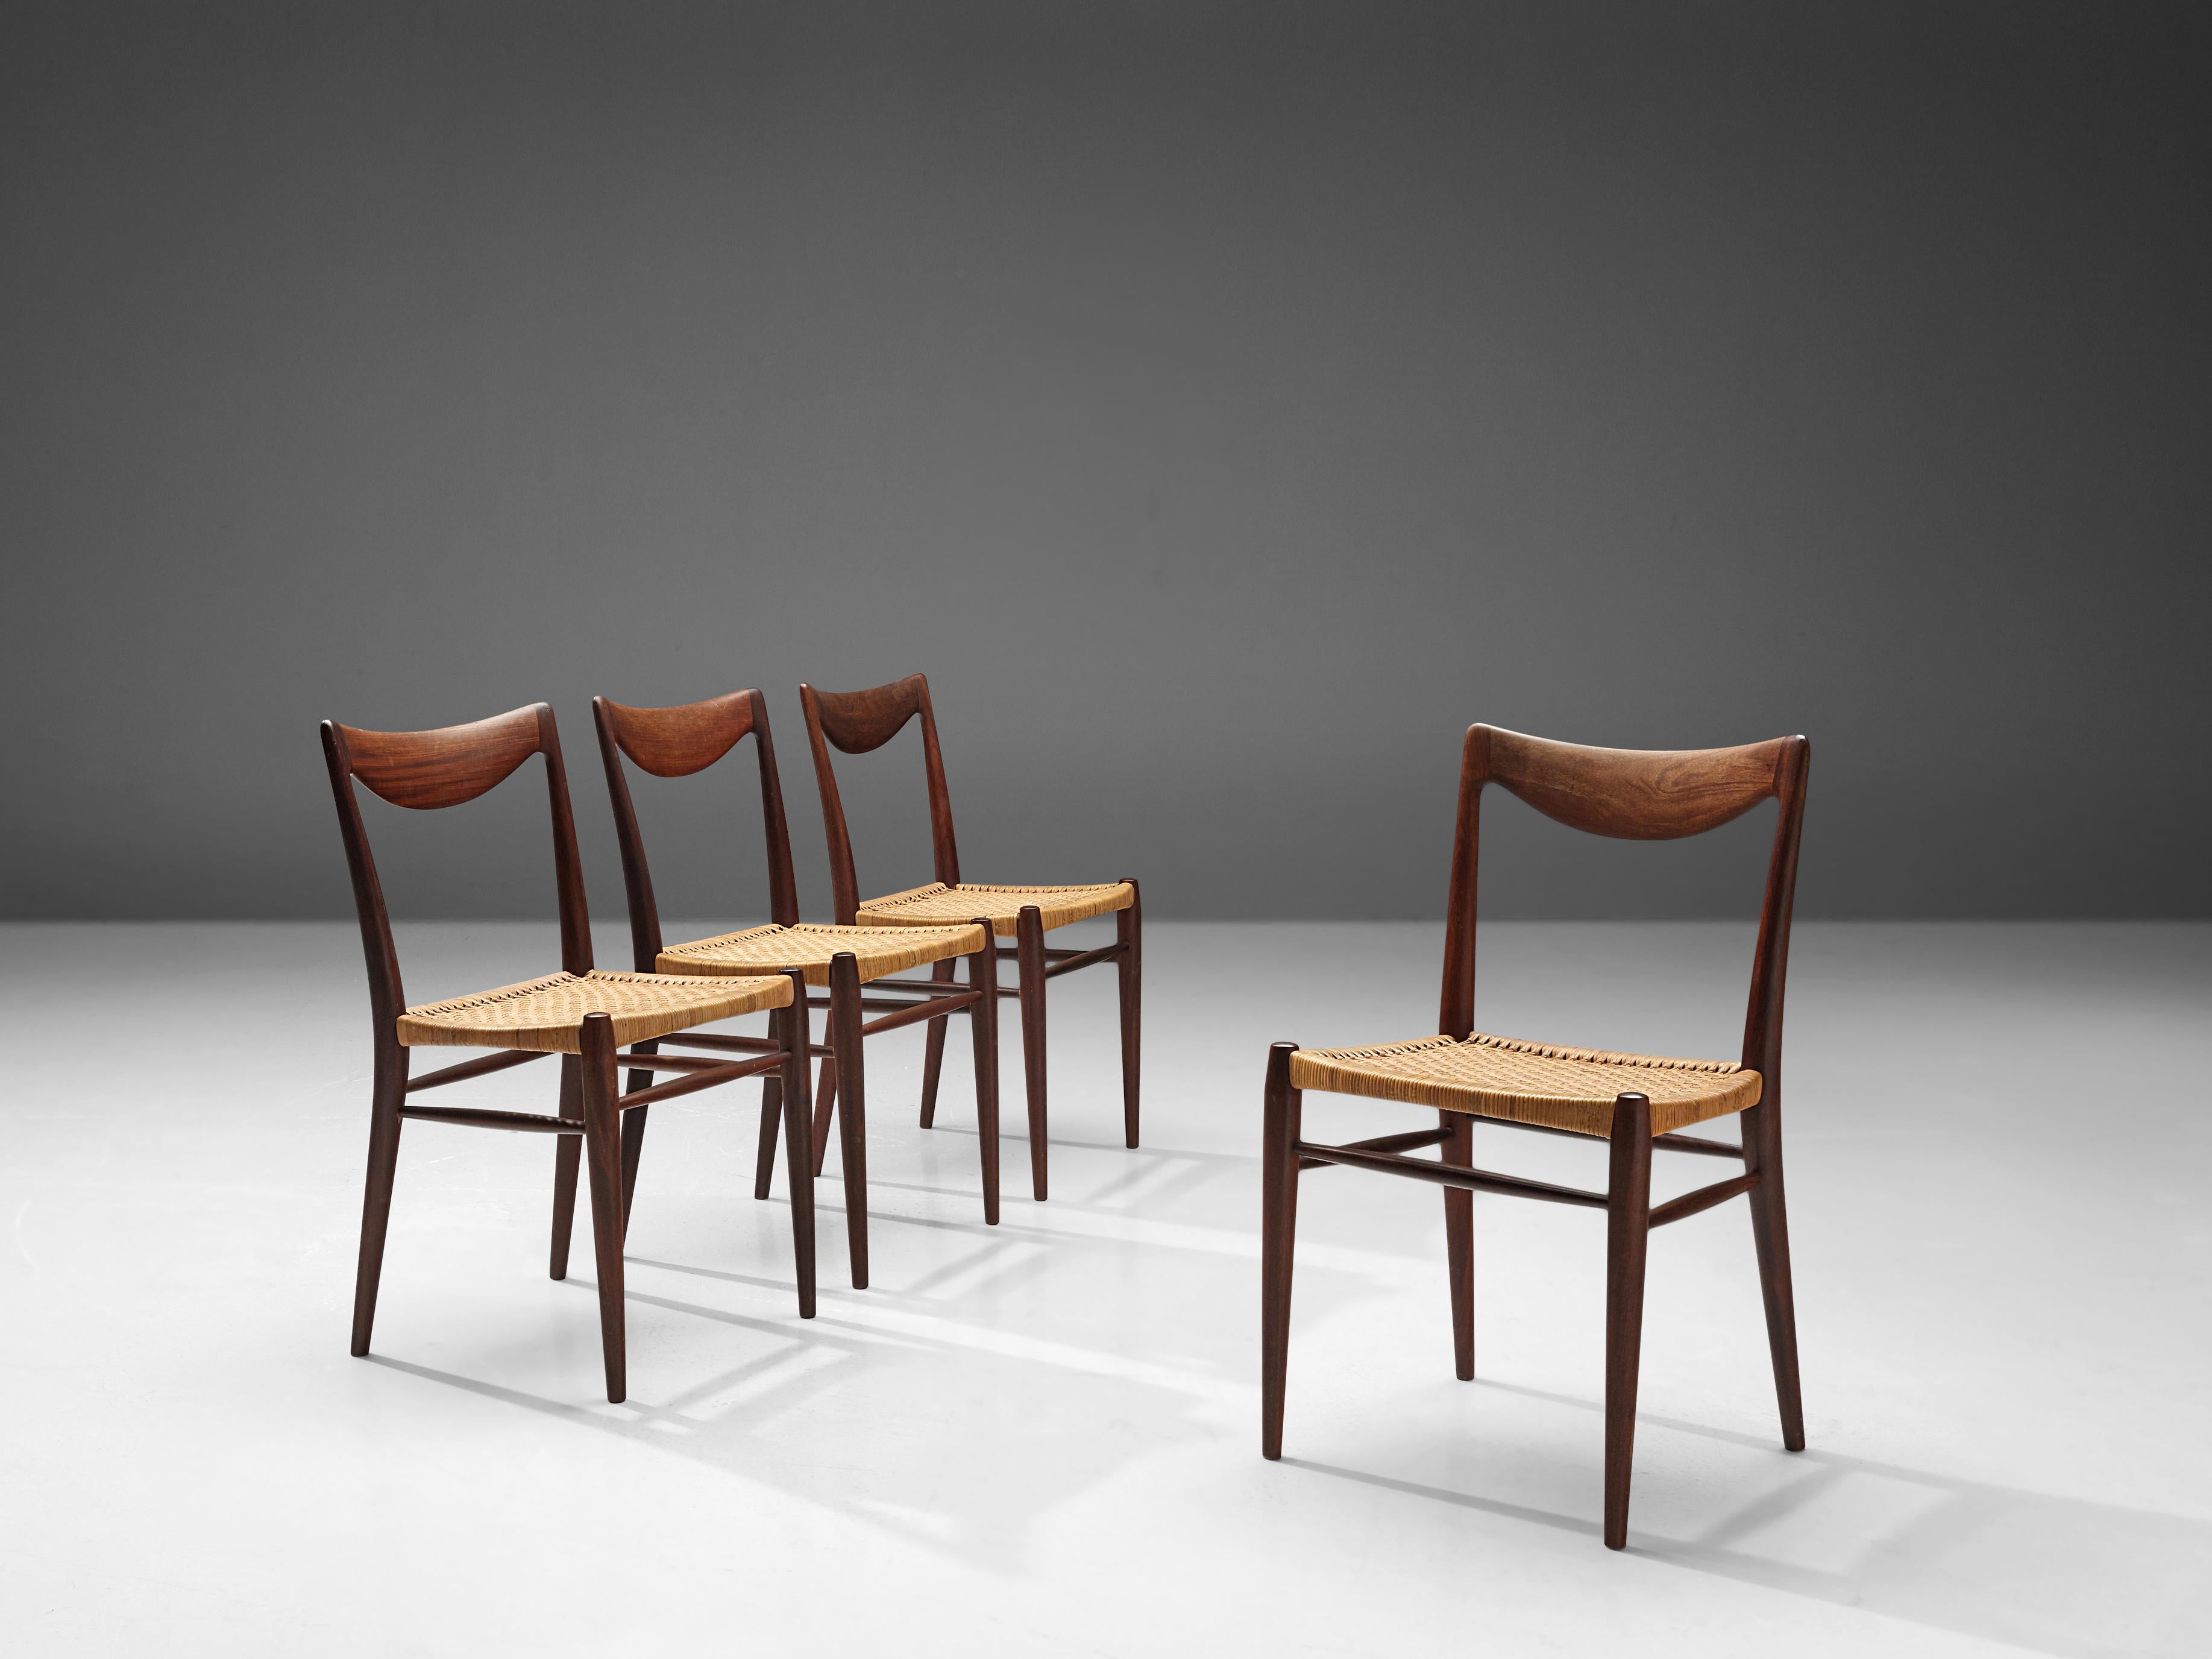 Adolf Relling and Rolf Rastad by Relling Tegnekontor for Gustav Bahus , set of four dining chairs, model 'Bambi', teak and cane, Norway, 1950s. 

Elegant set of four dining chairs, model 'Bambi', designed by Adolf Relling and Rolf Rastad. These